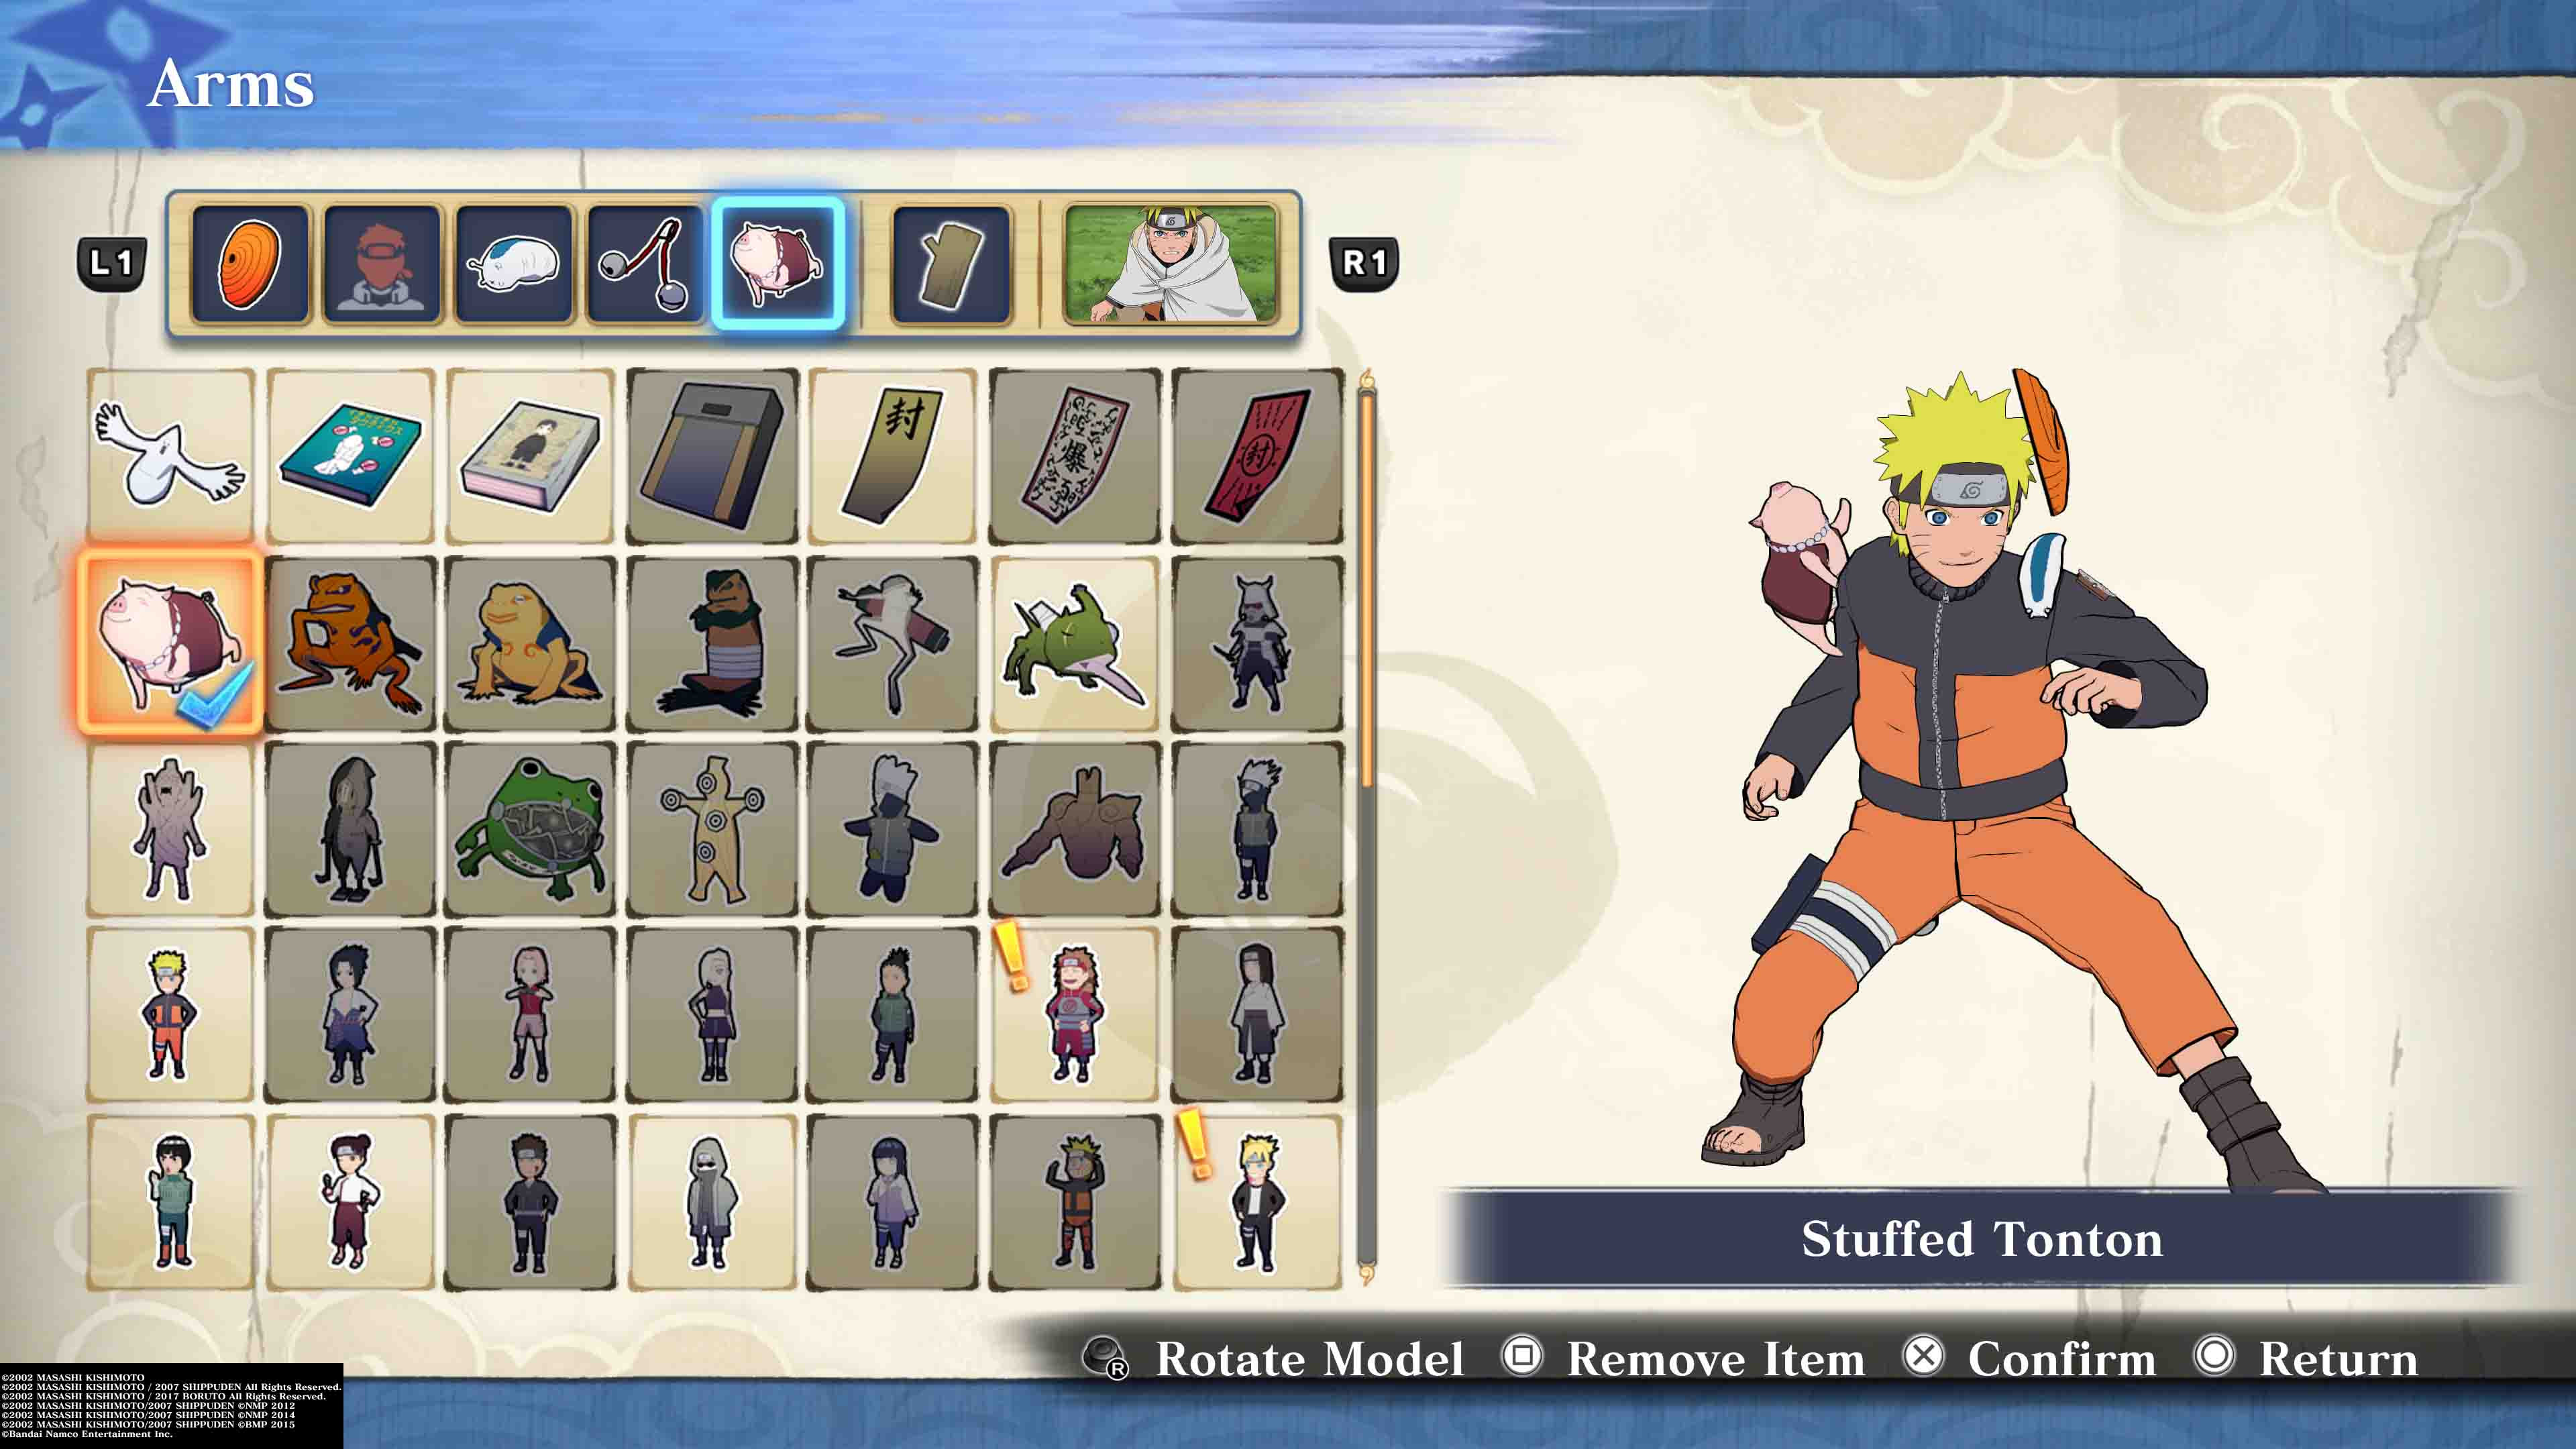 5 tips you should know before playing NARUTO X BORUTO Ultimate Ninja STORM  CONNECTIONS